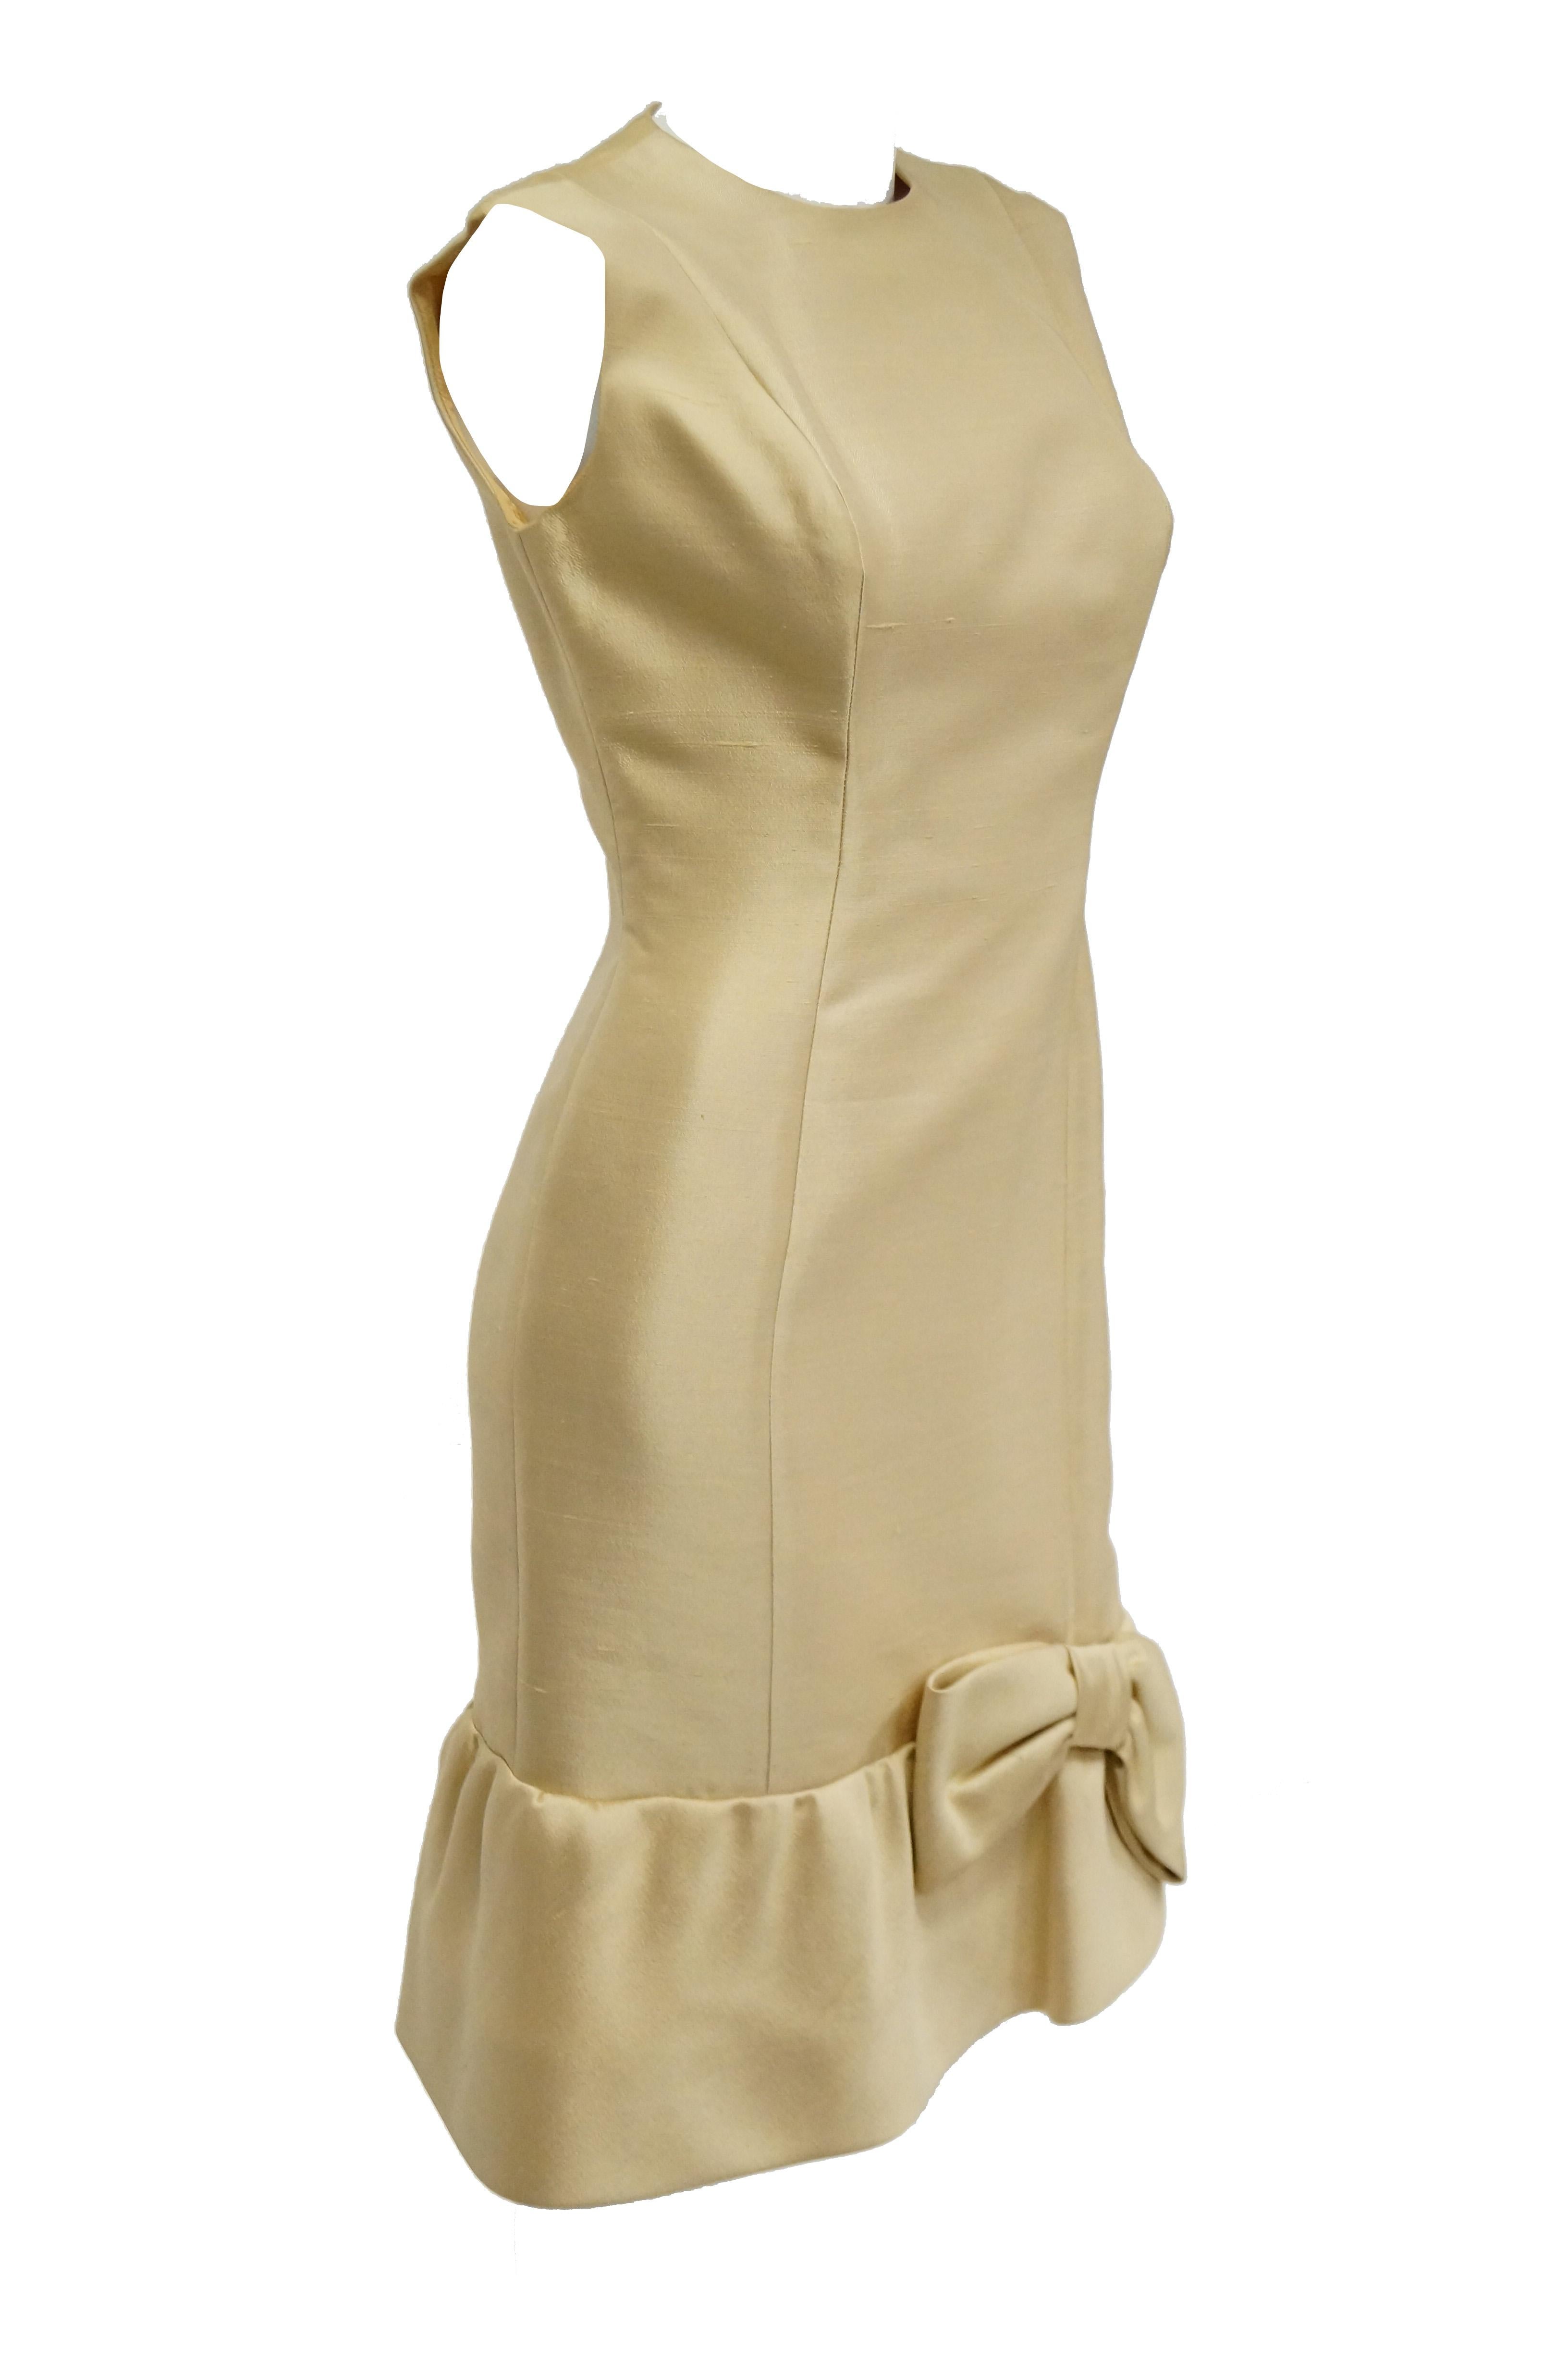 1960s Mardi Gras Champagne Gold Cocktail Sheath Dress with Bow Detail In Excellent Condition For Sale In Houston, TX